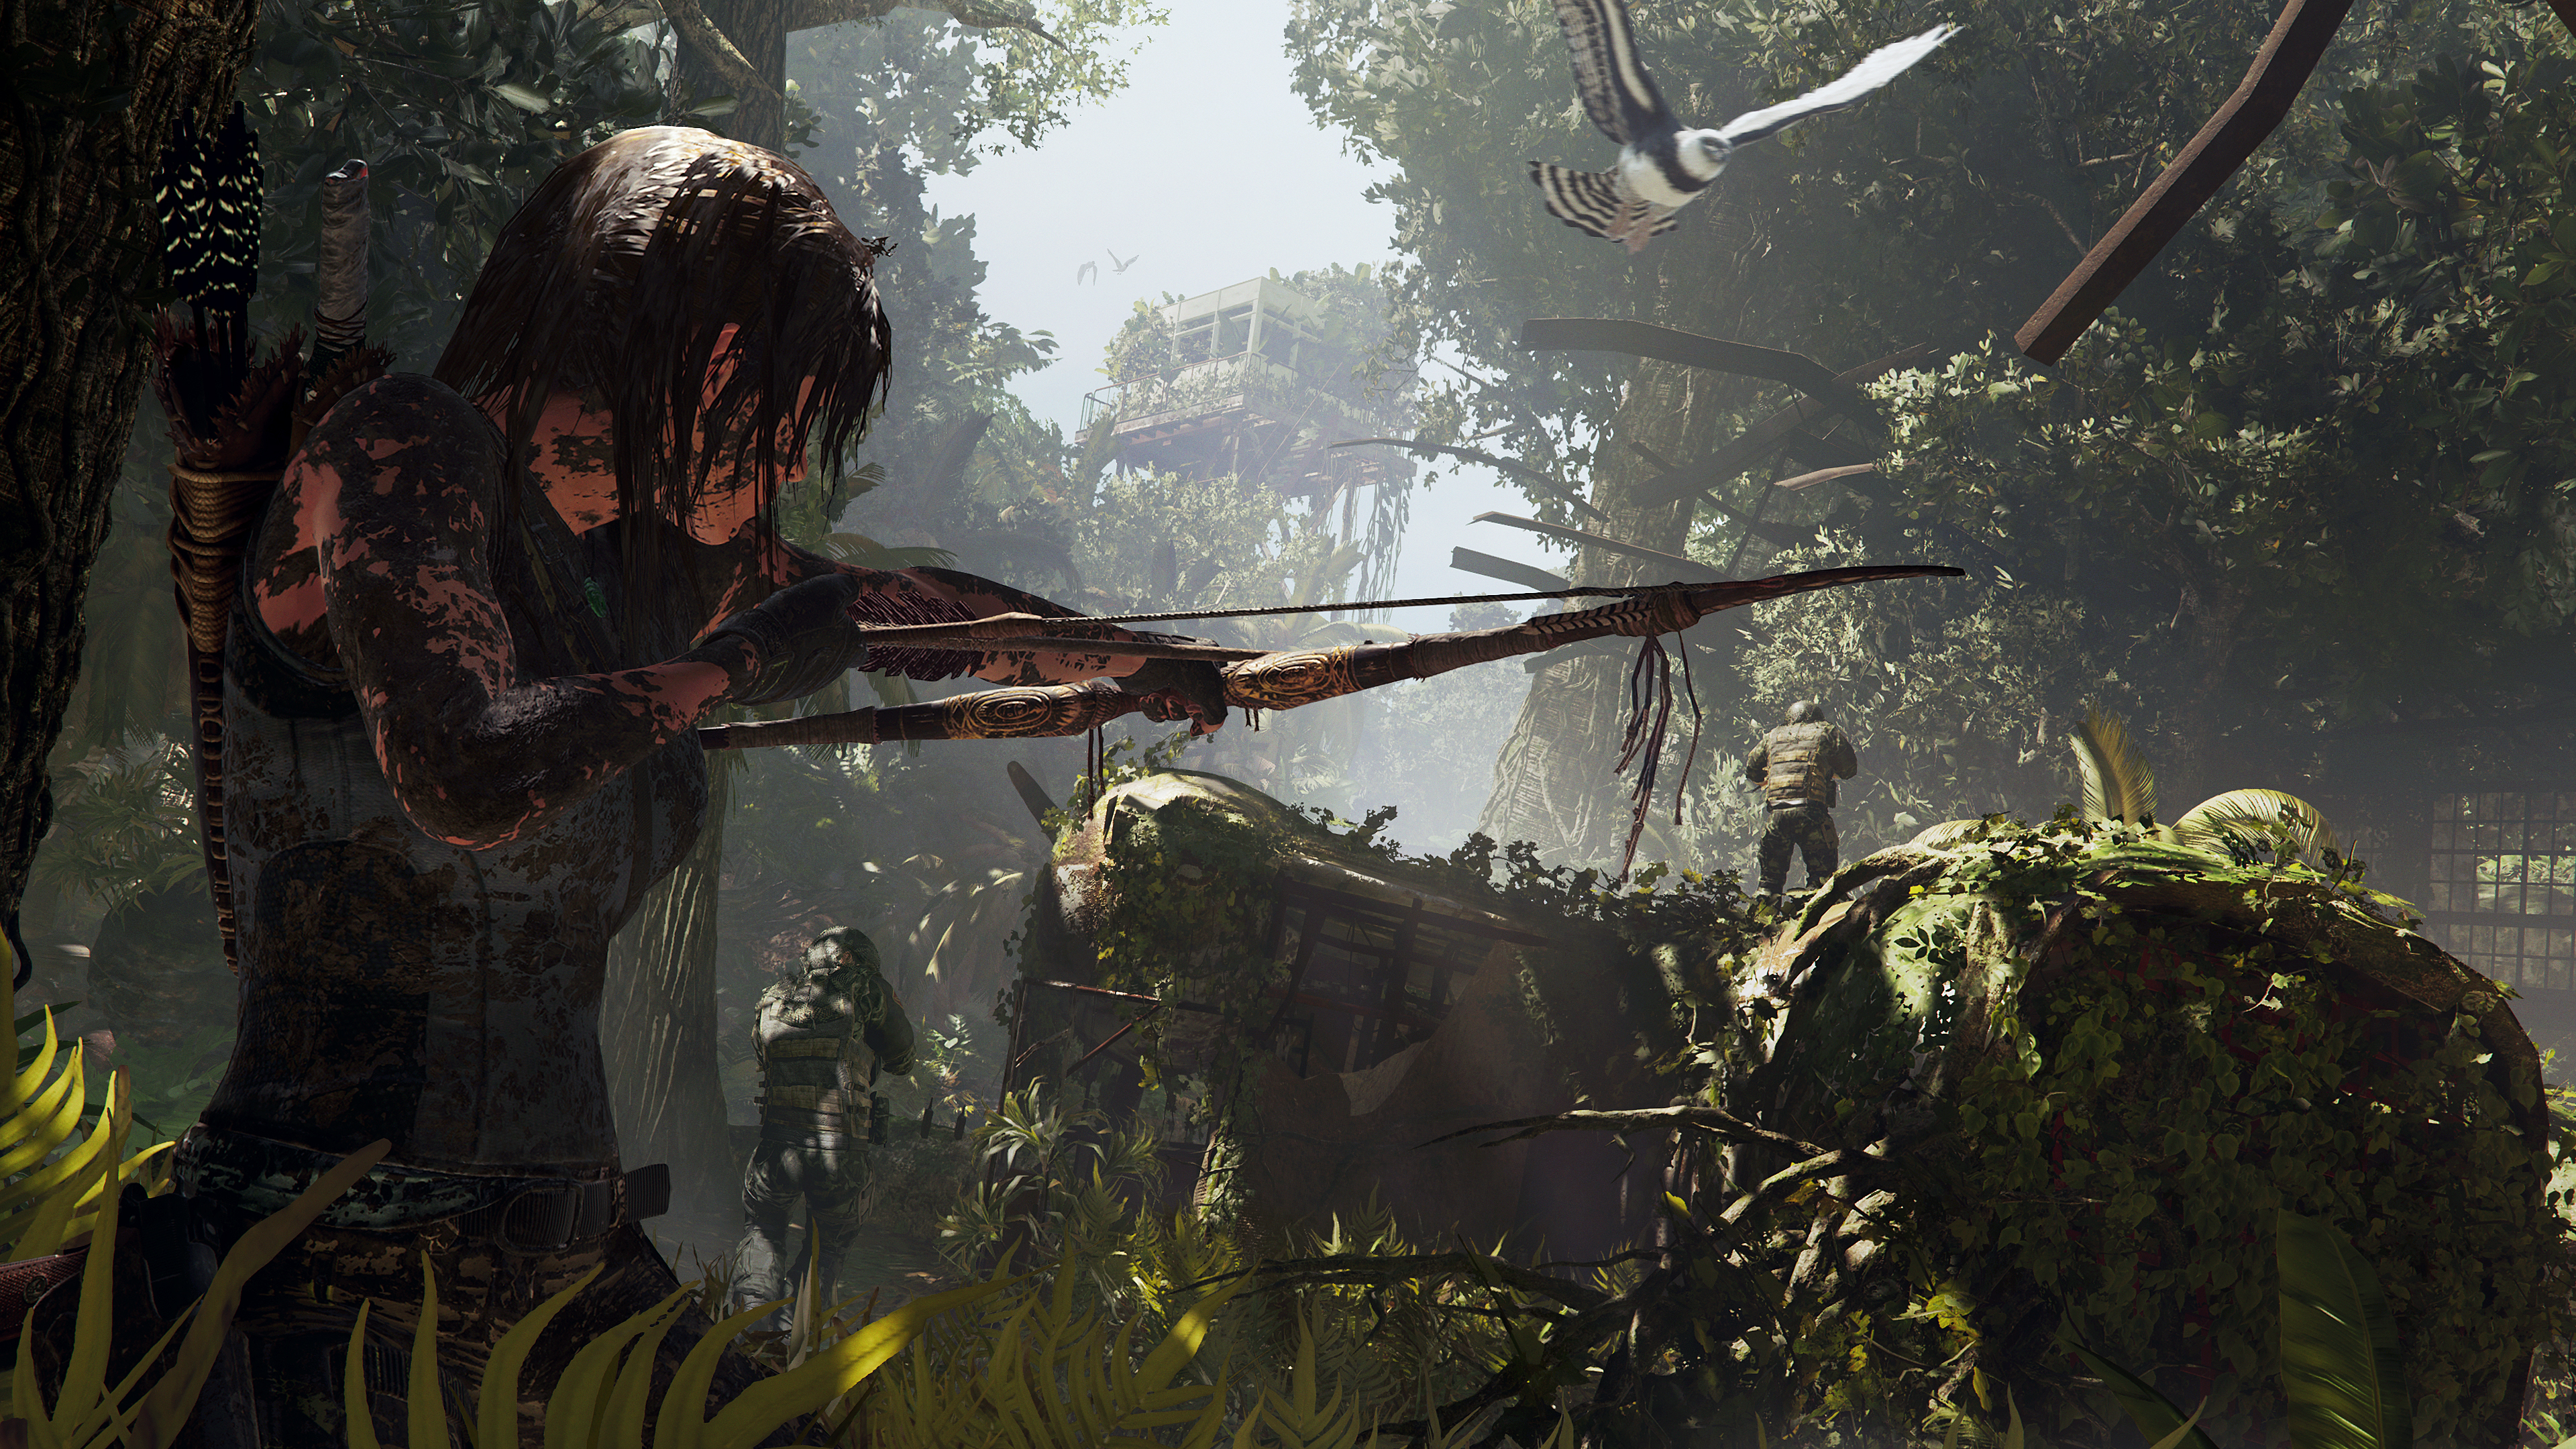 Media asset in full size related to 3dfxzone.it news item entitled as follows: Nuovi gameplay trailers e screenshots del game Shadow of the Tomb Raider | Image Name: news28511_Shadow-of-the-Tomb-Raider-Screenshot_2.jpg